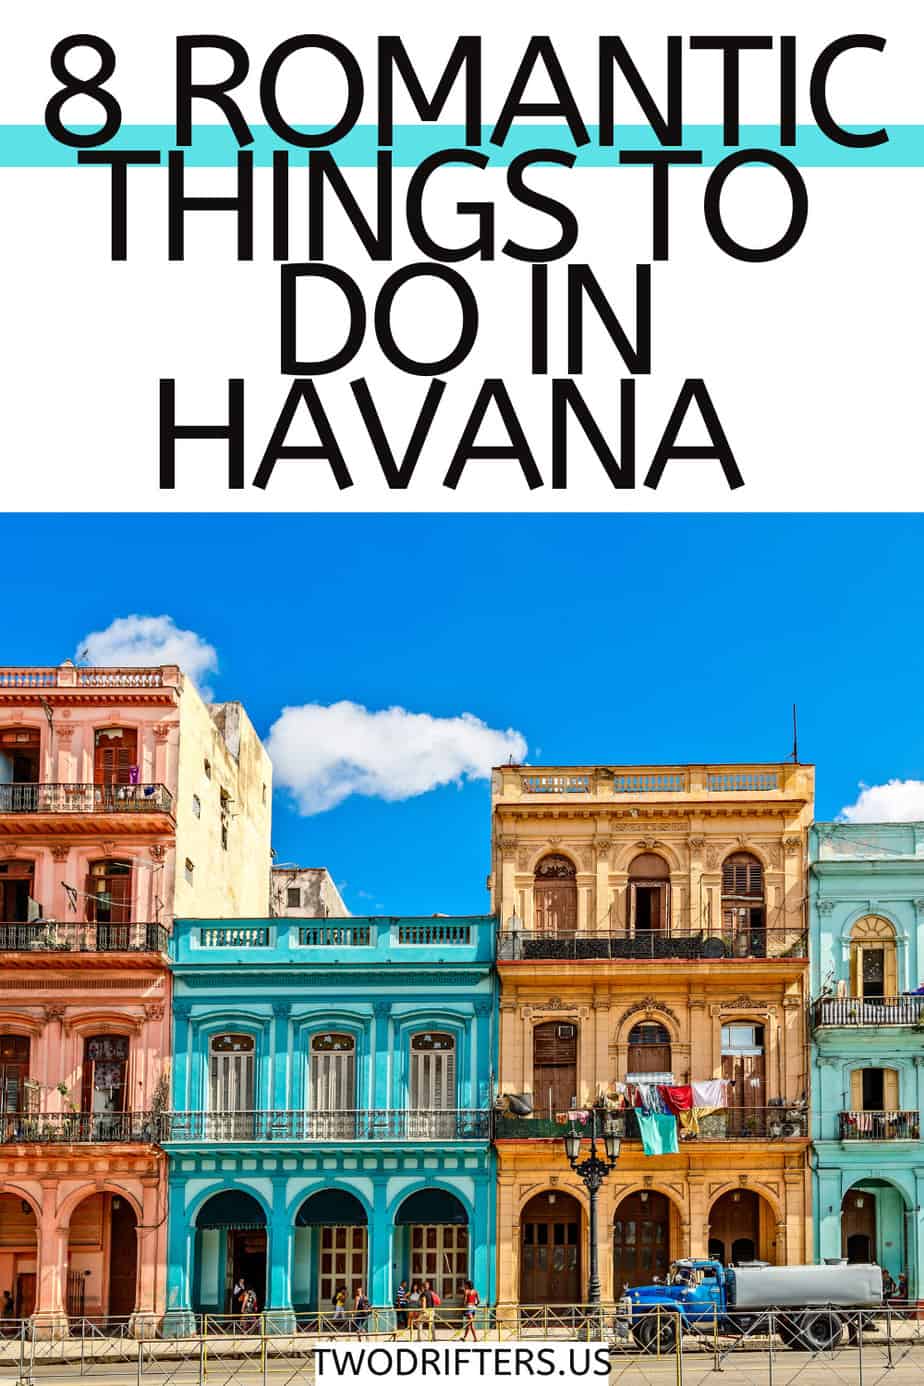 Pinterest social share image that says "8 Romantic Things to do in Havana."